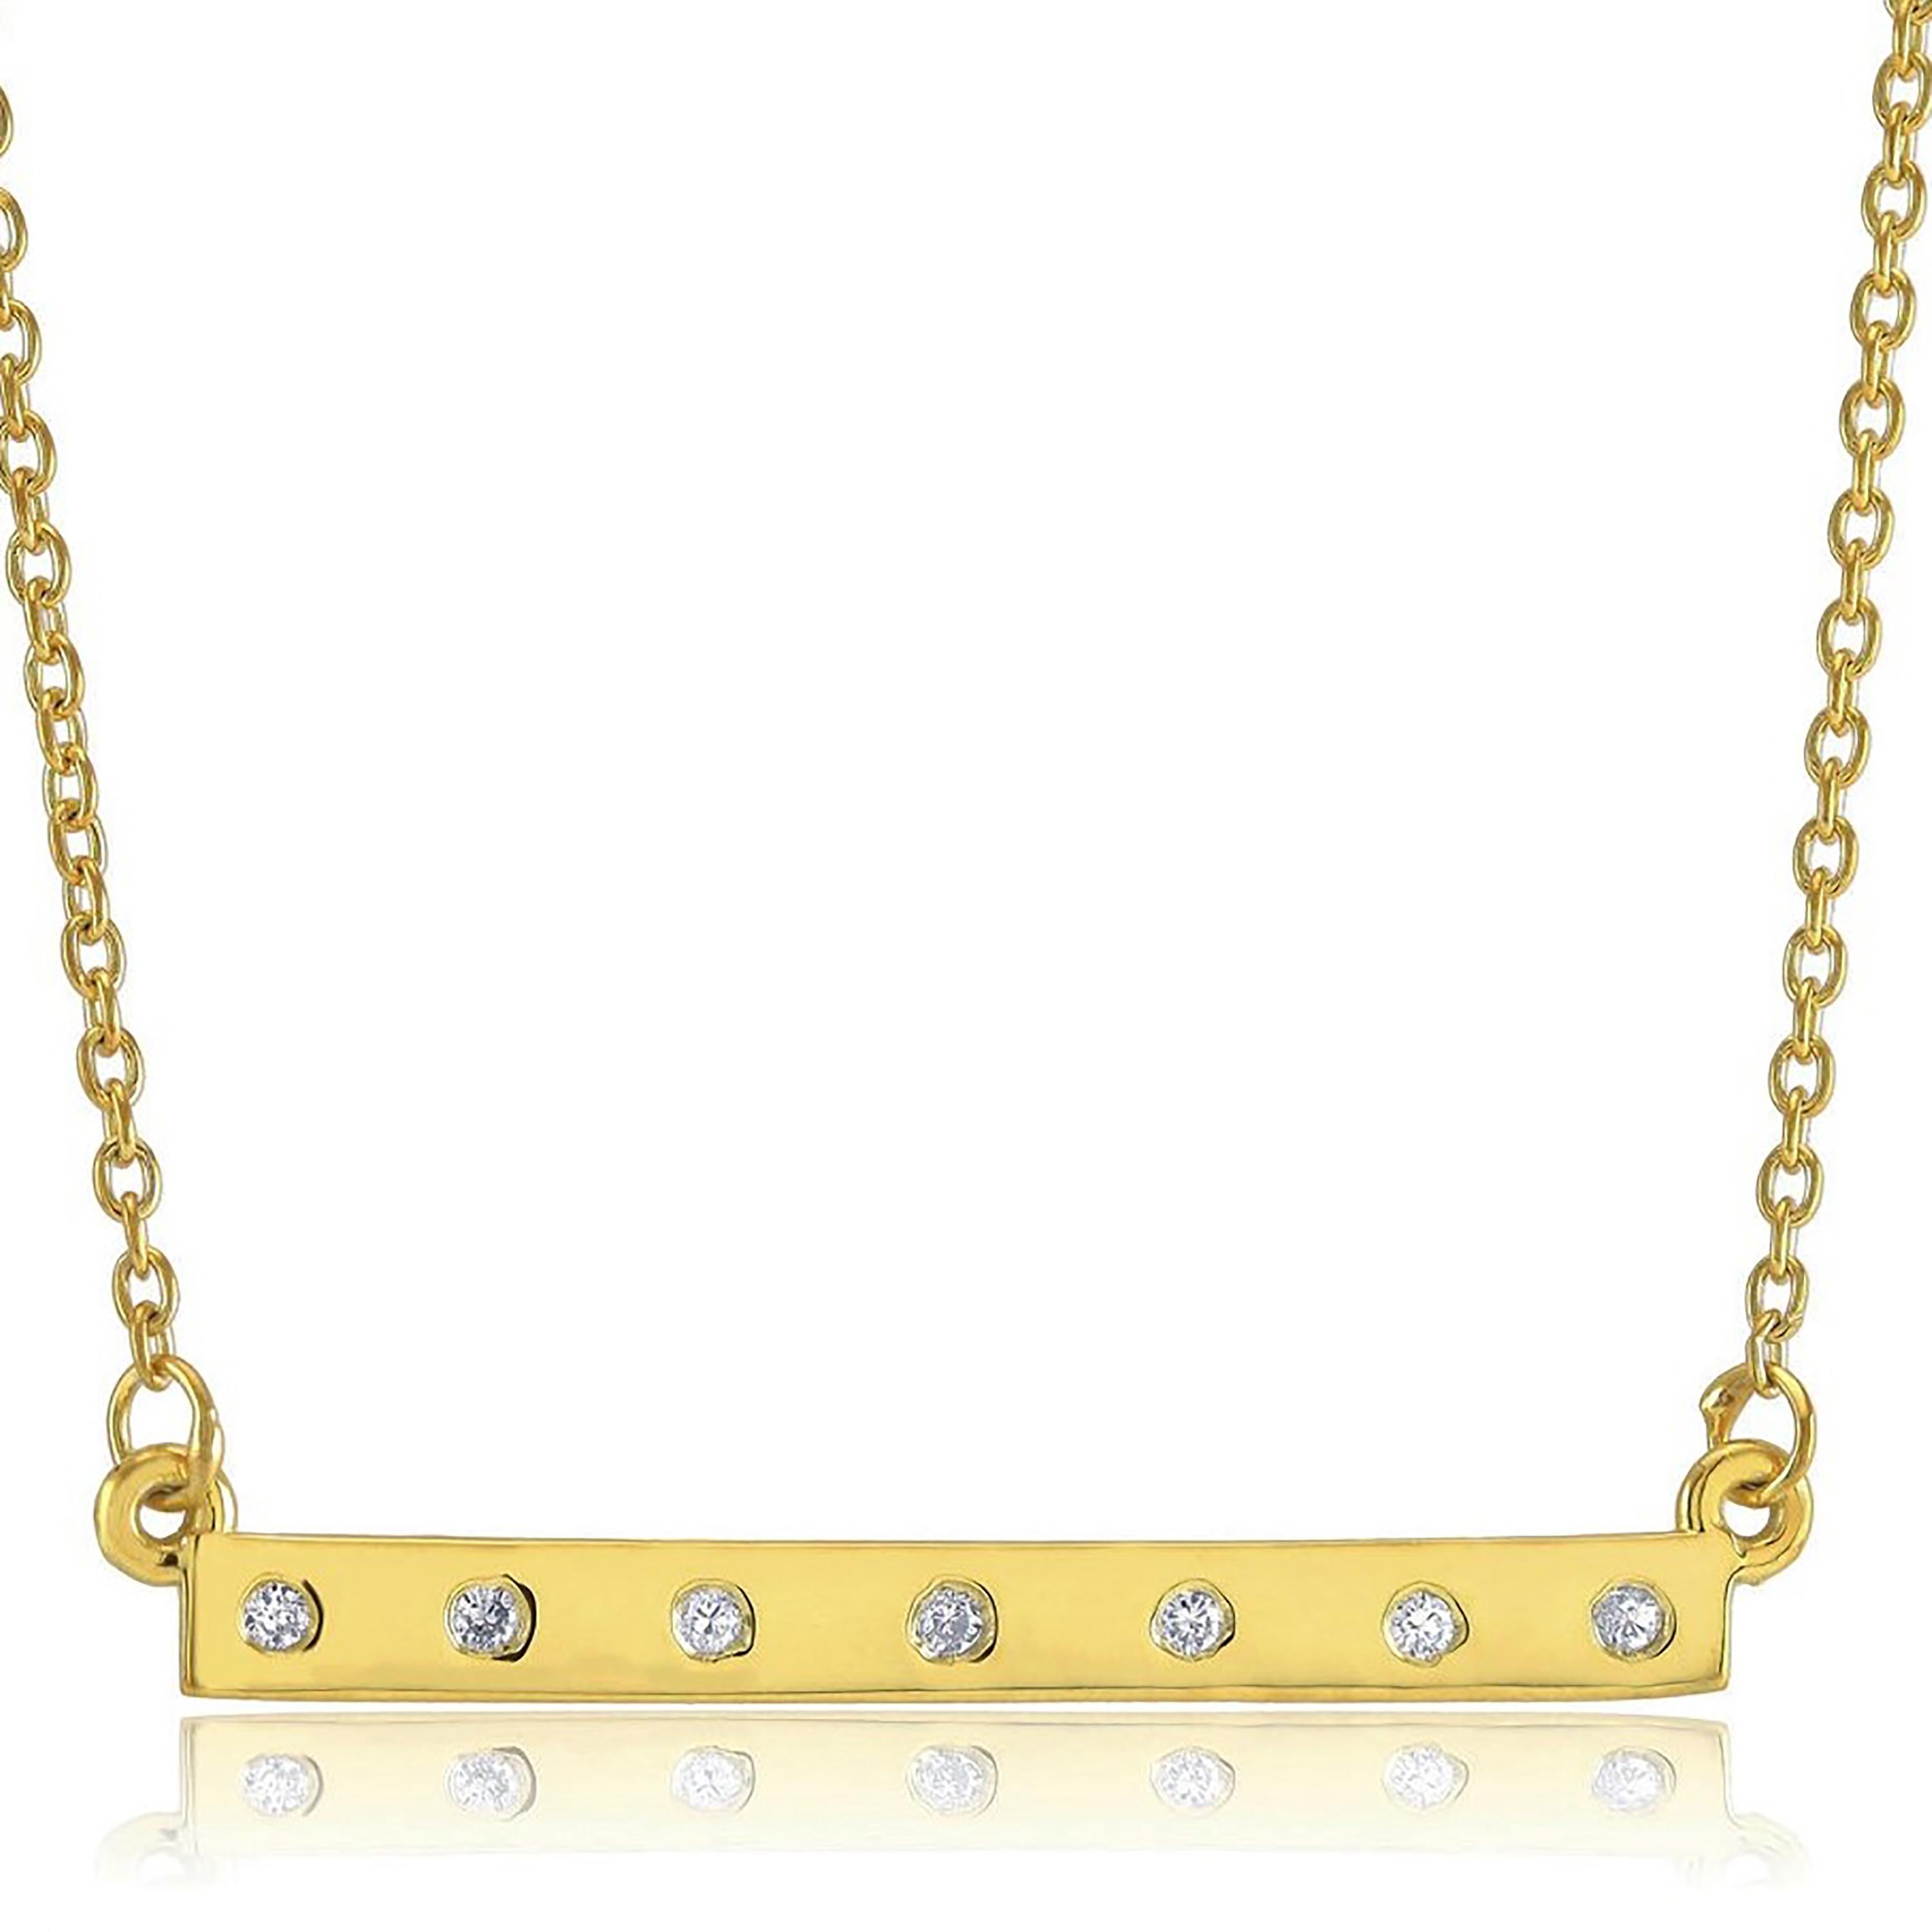 Contemporary Natural Genuine Diamond Bar Silver Pendant Necklace Yellow Gold-Plated